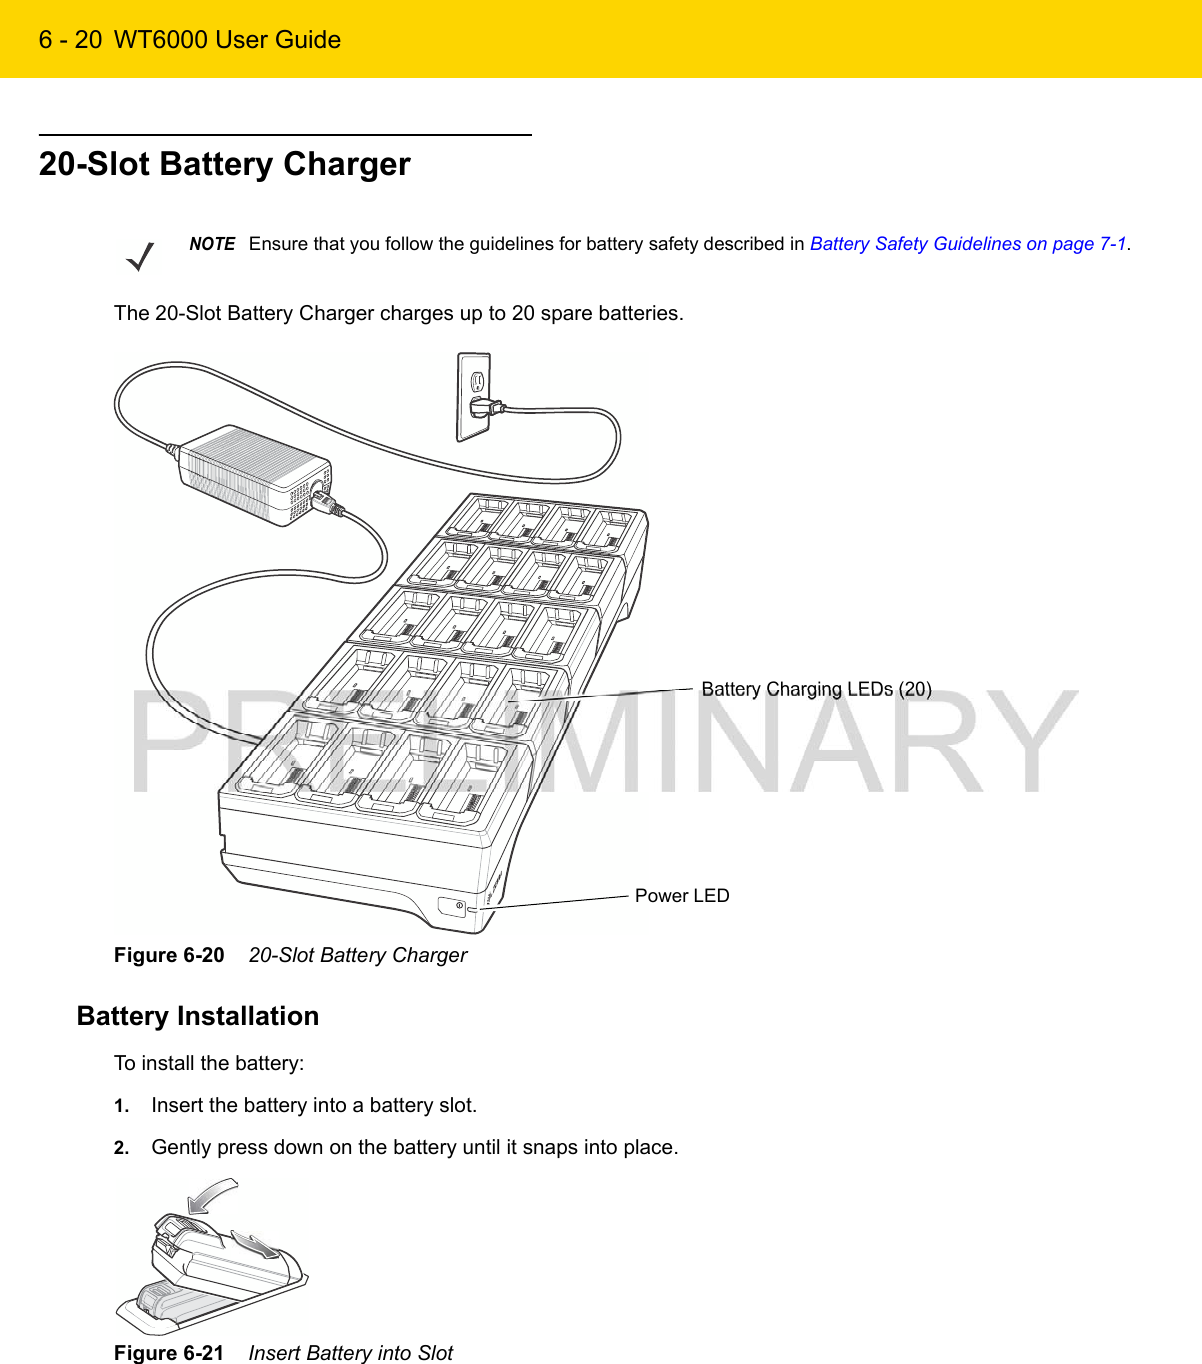 6 - 20 WT6000 User Guide20-Slot Battery ChargerThe 20-Slot Battery Charger charges up to 20 spare batteries.Figure 6-20    20-Slot Battery ChargerBattery InstallationTo install the battery:1. Insert the battery into a battery slot.2. Gently press down on the battery until it snaps into place.Figure 6-21    Insert Battery into SlotNOTEEnsure that you follow the guidelines for battery safety described in Battery Safety Guidelines on page 7-1.Battery Charging LEDs (20)Power LED